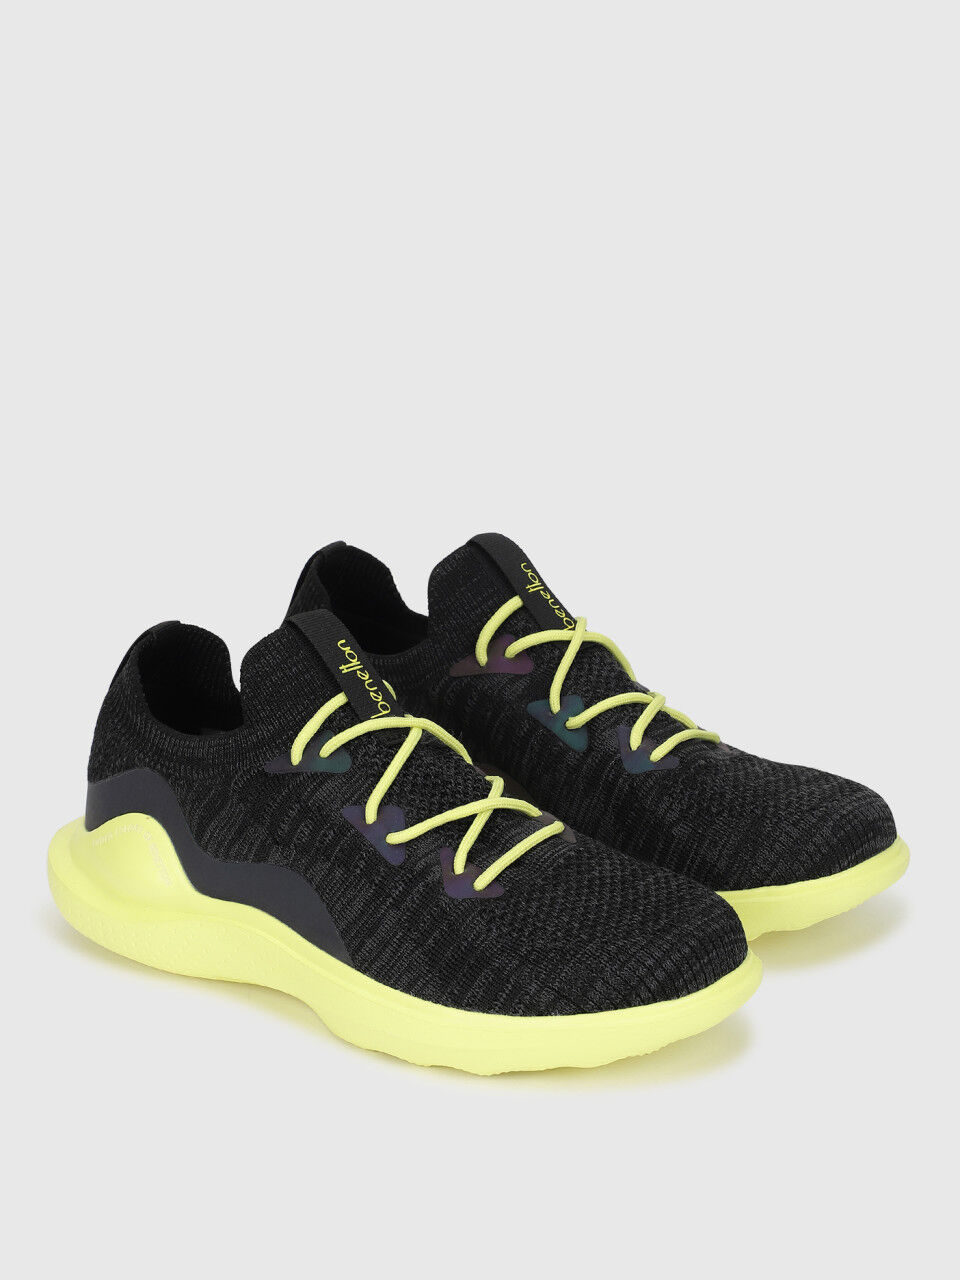 Discover more than 232 ucb yellow sneakers